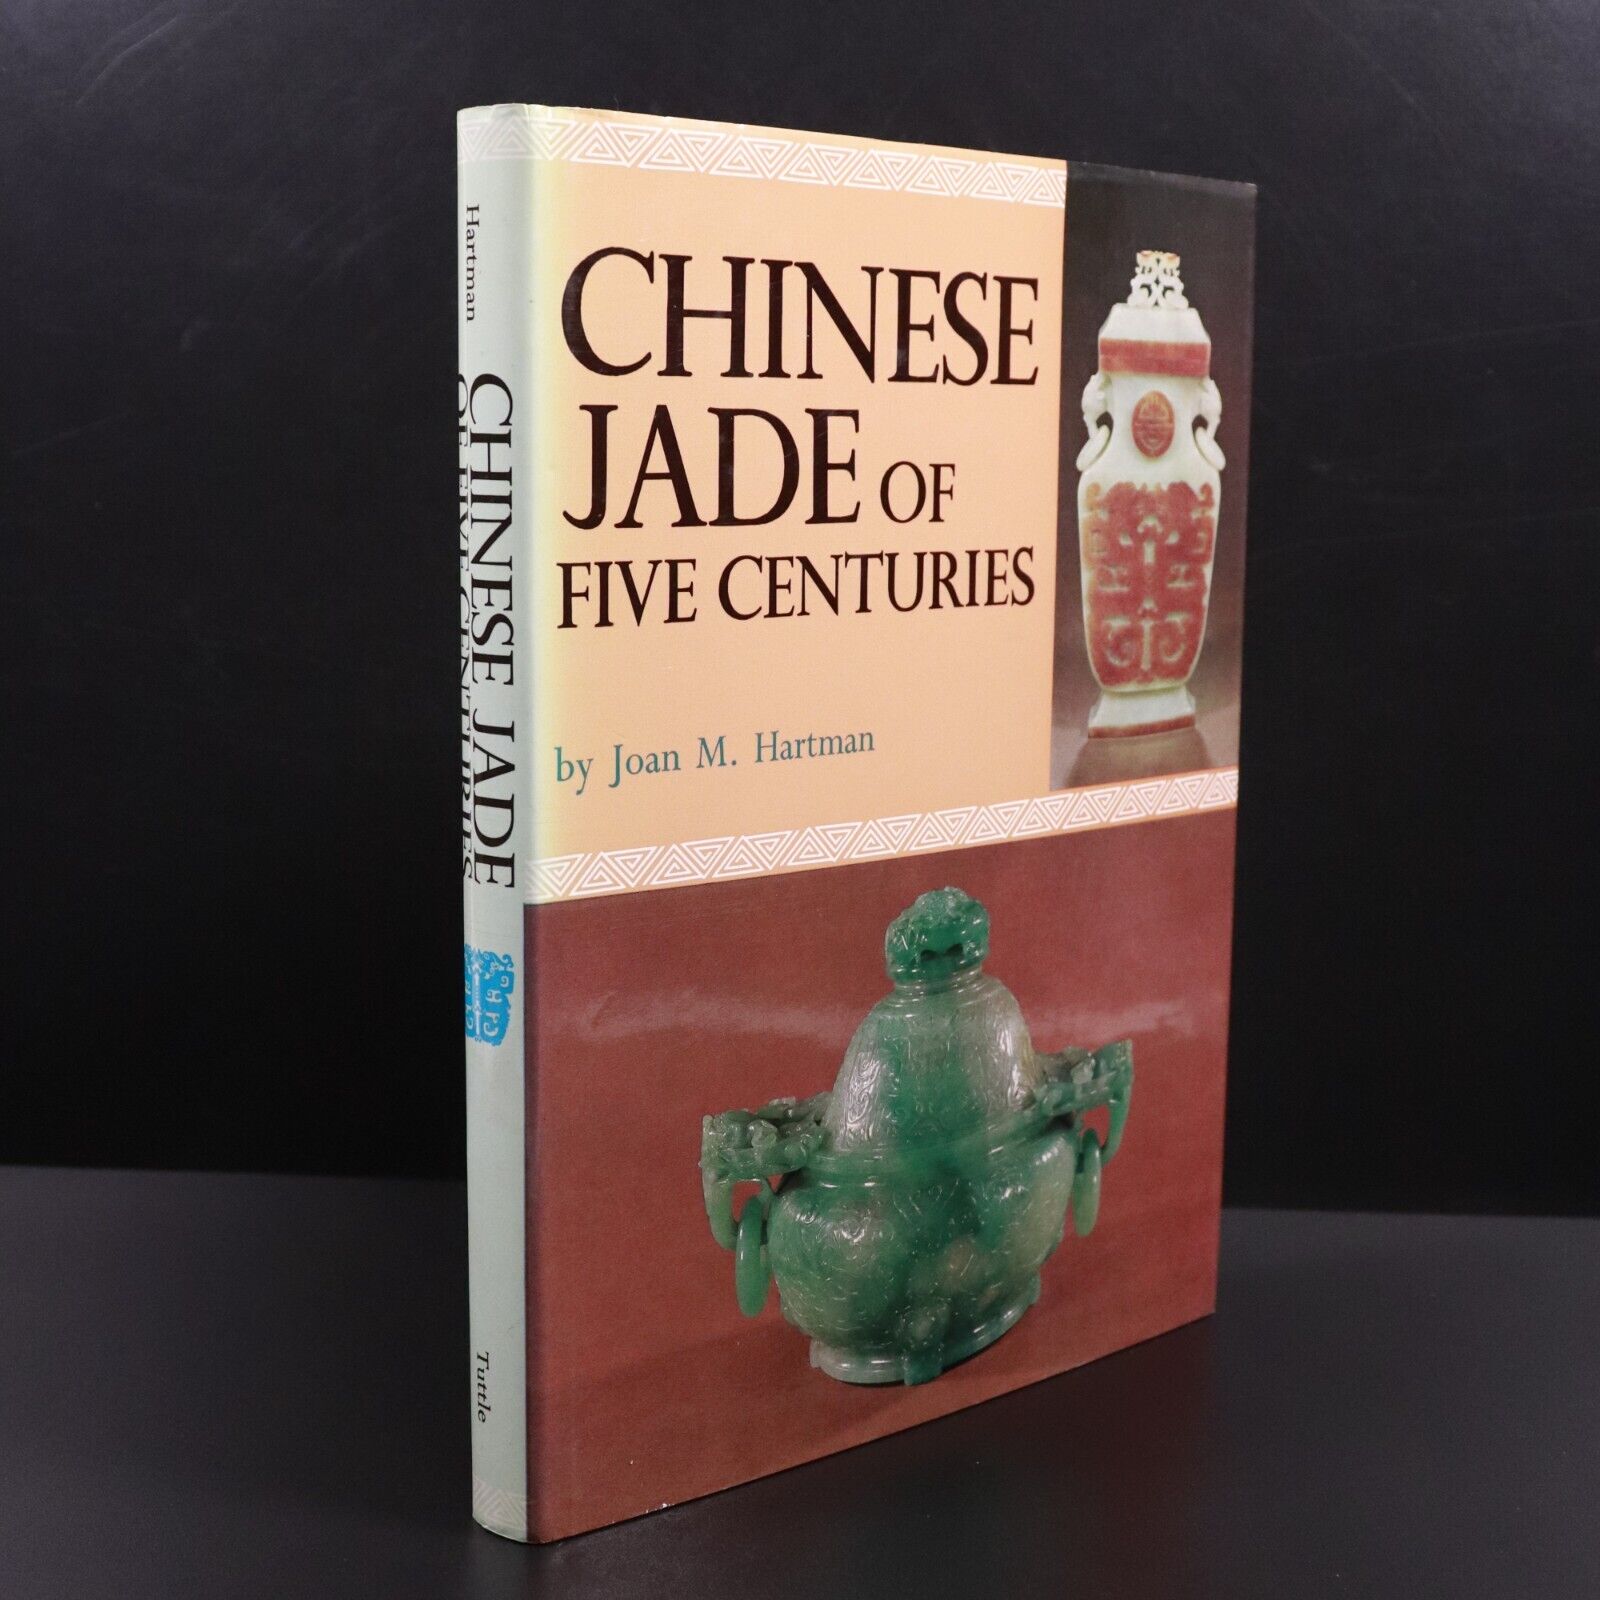 1972 Chinese Jade Of Five Centuries by J.M. Hartman Gemstones Reference Book